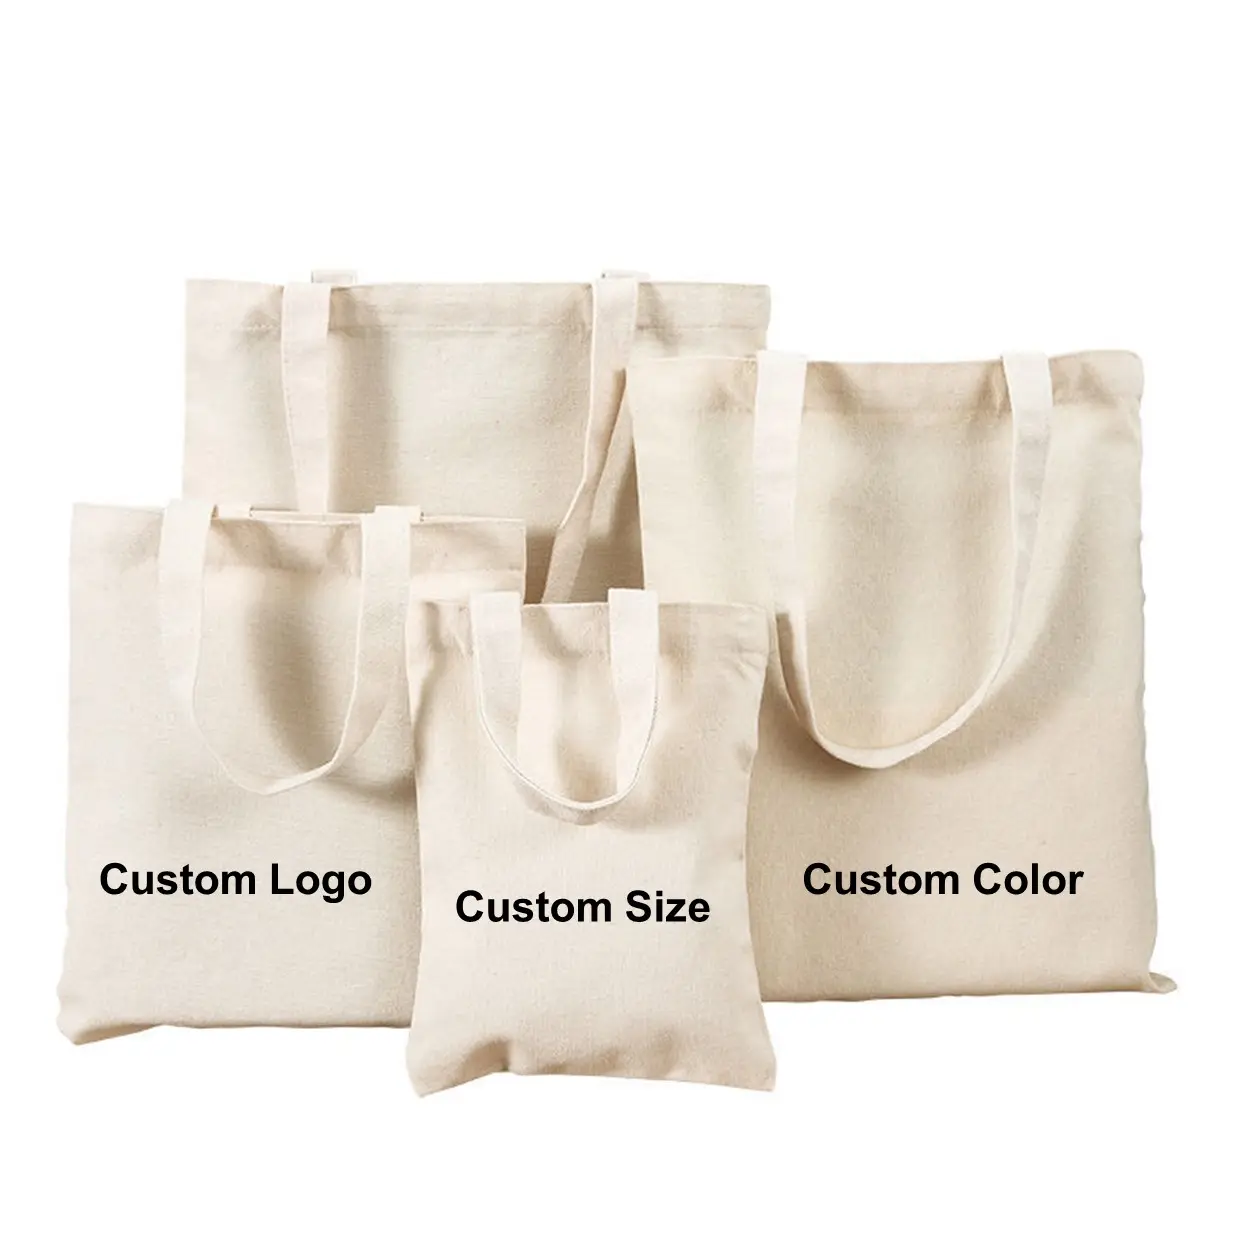 Promotional Personalized Cotton Canvas Bags Reusable Shopping Cotton Tote Bags With Custom Printed Logo